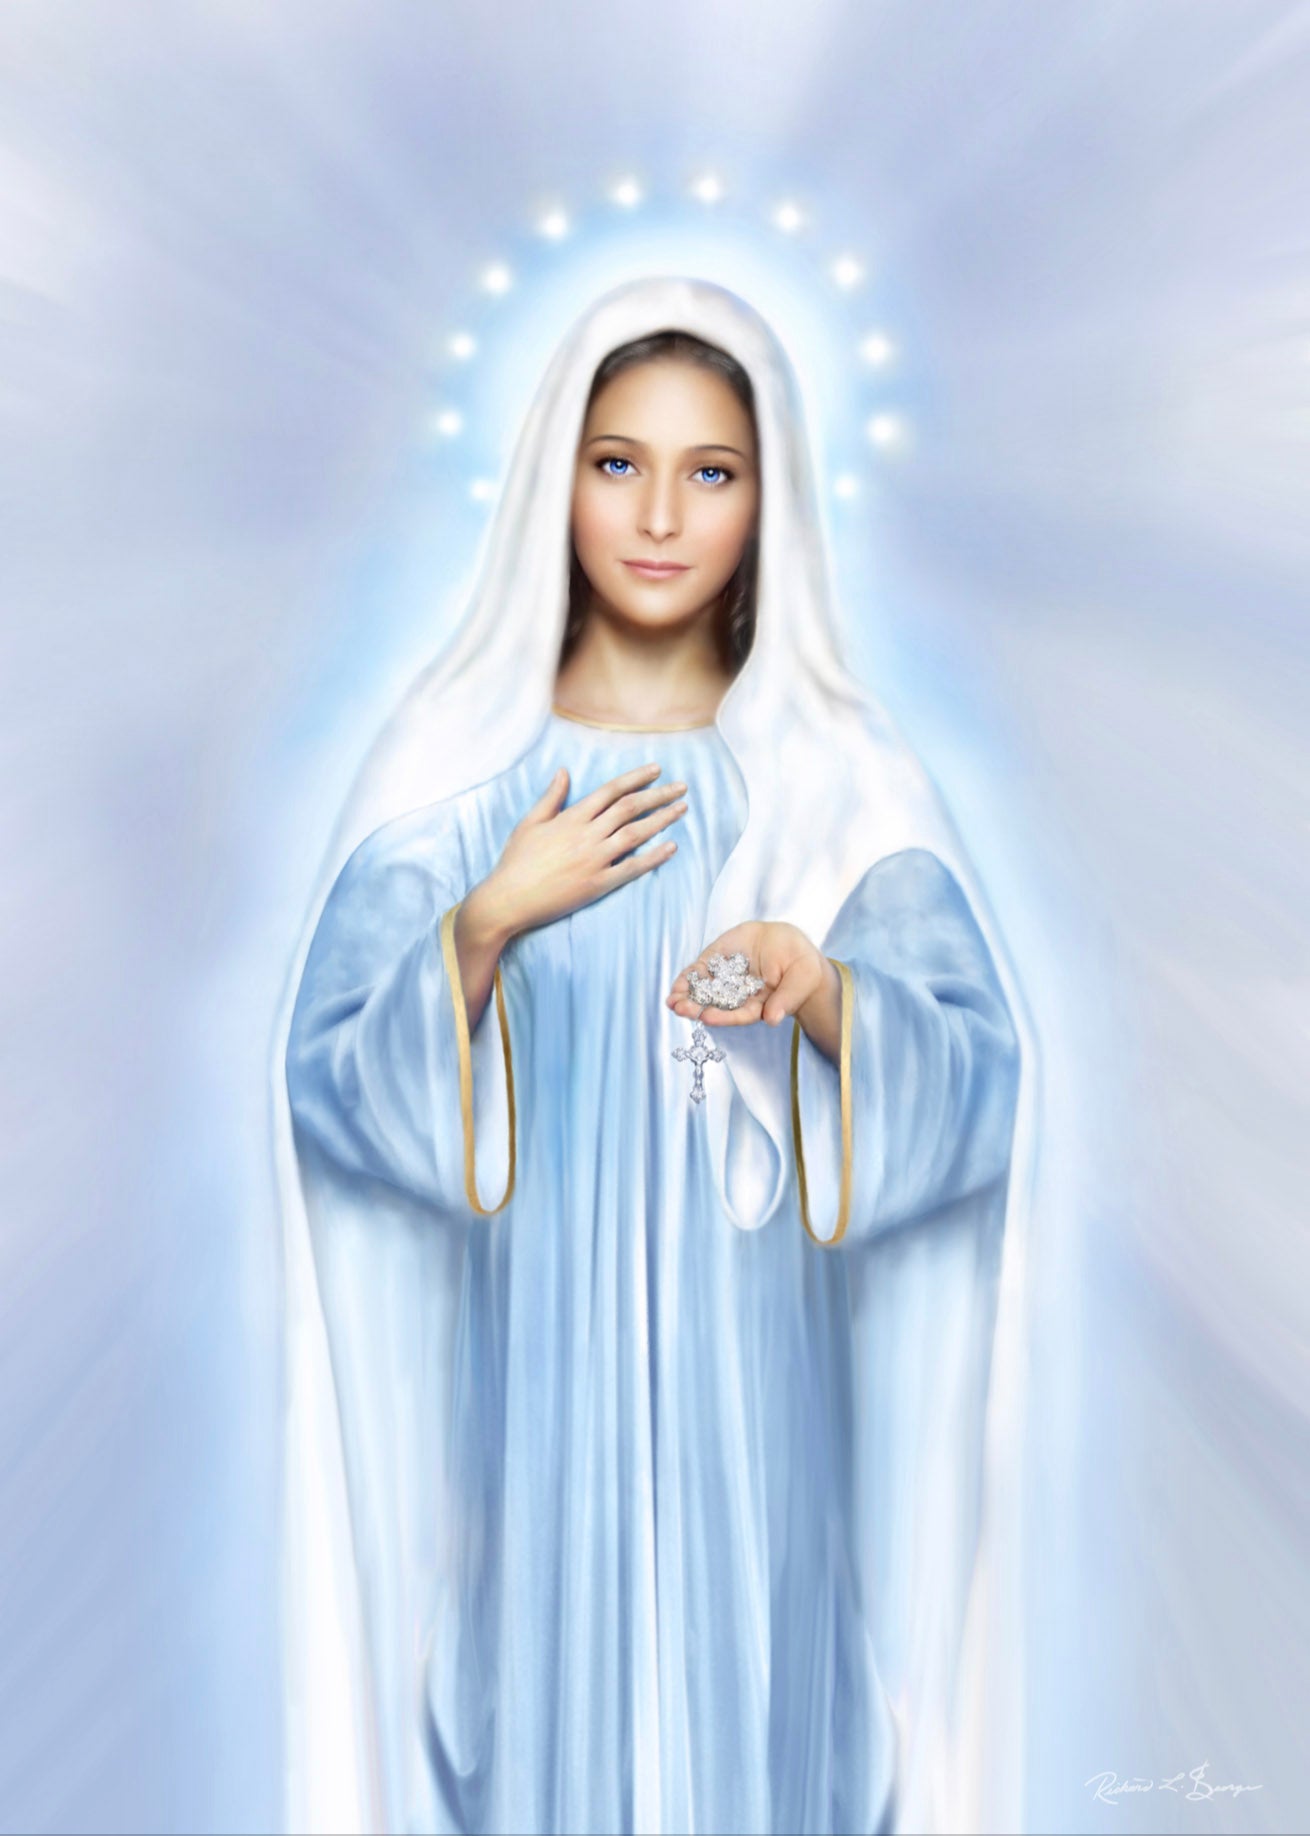 Our Lady of Medjugorje Art Print by R.L. George